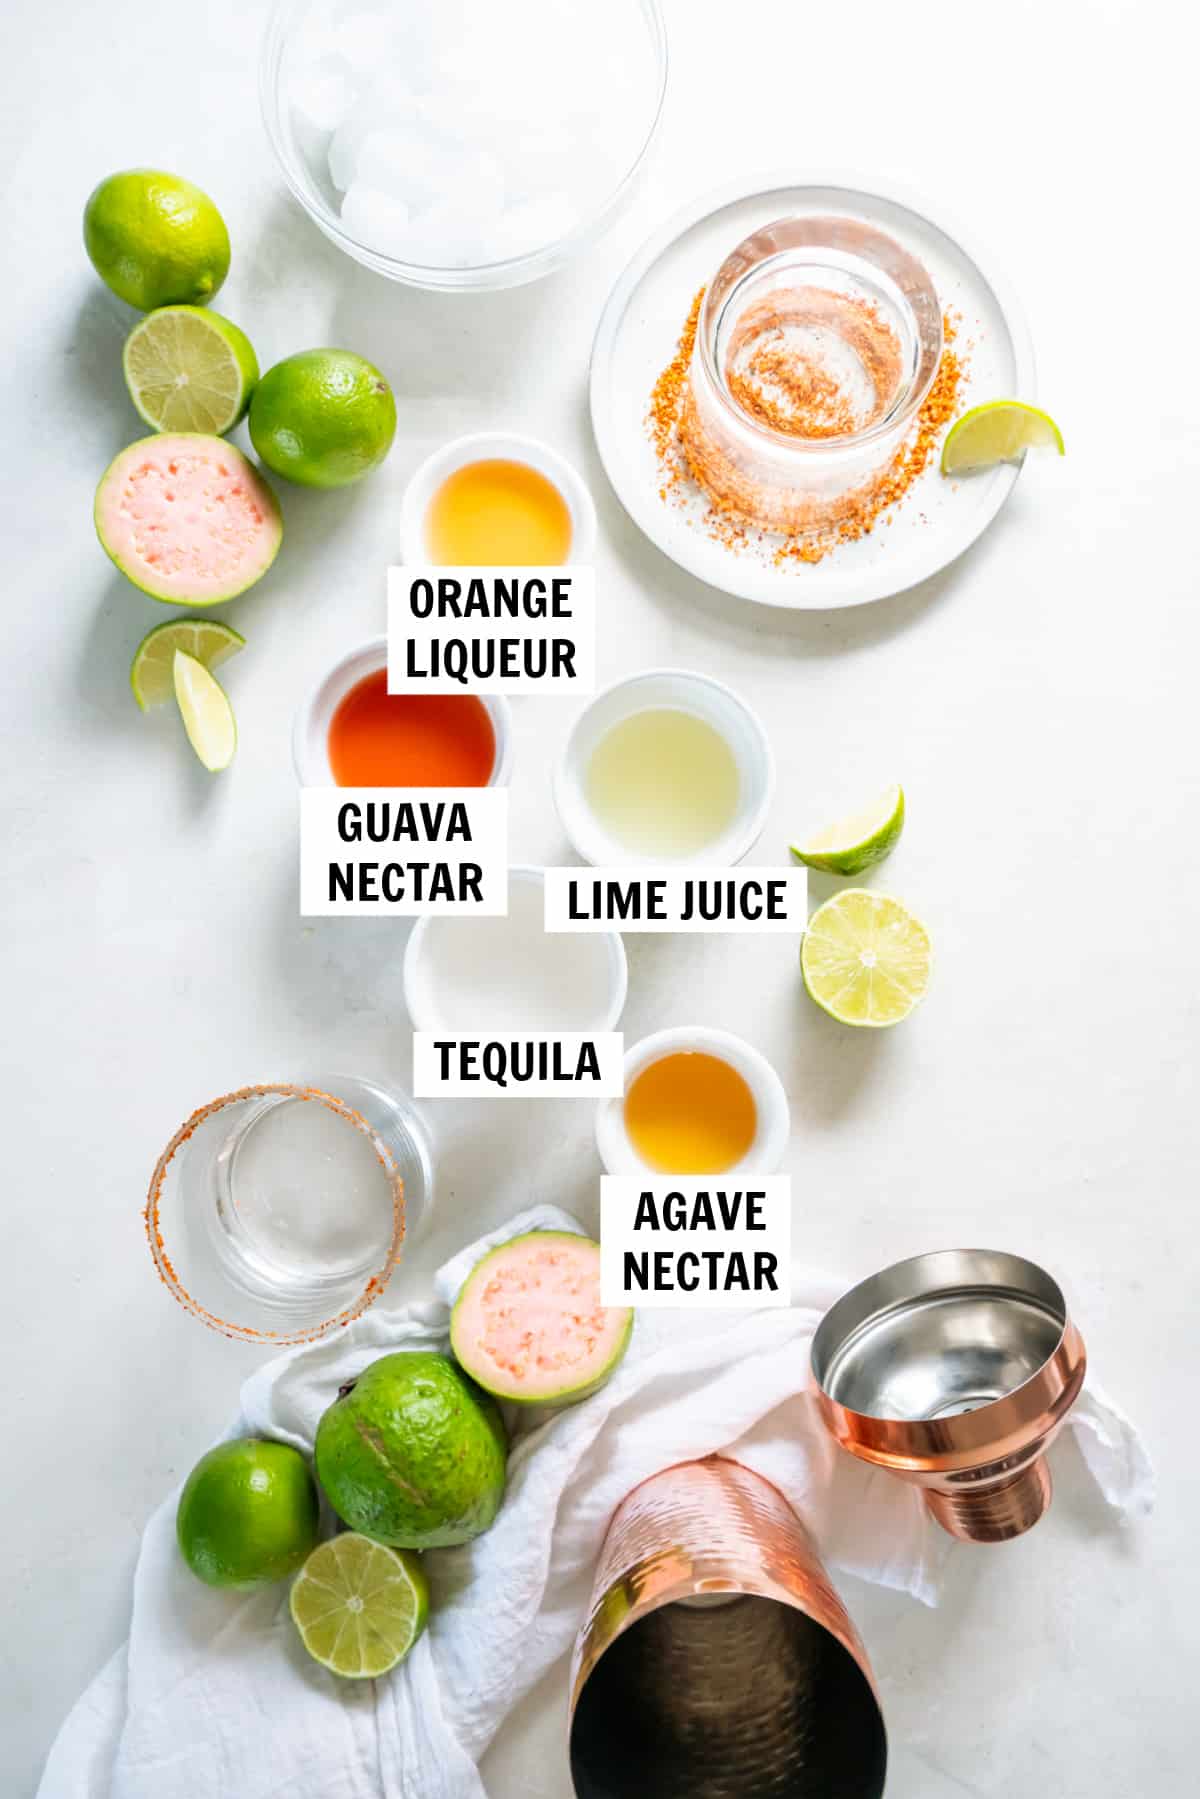 All of the ingredients for guava nectar on a white countertop.